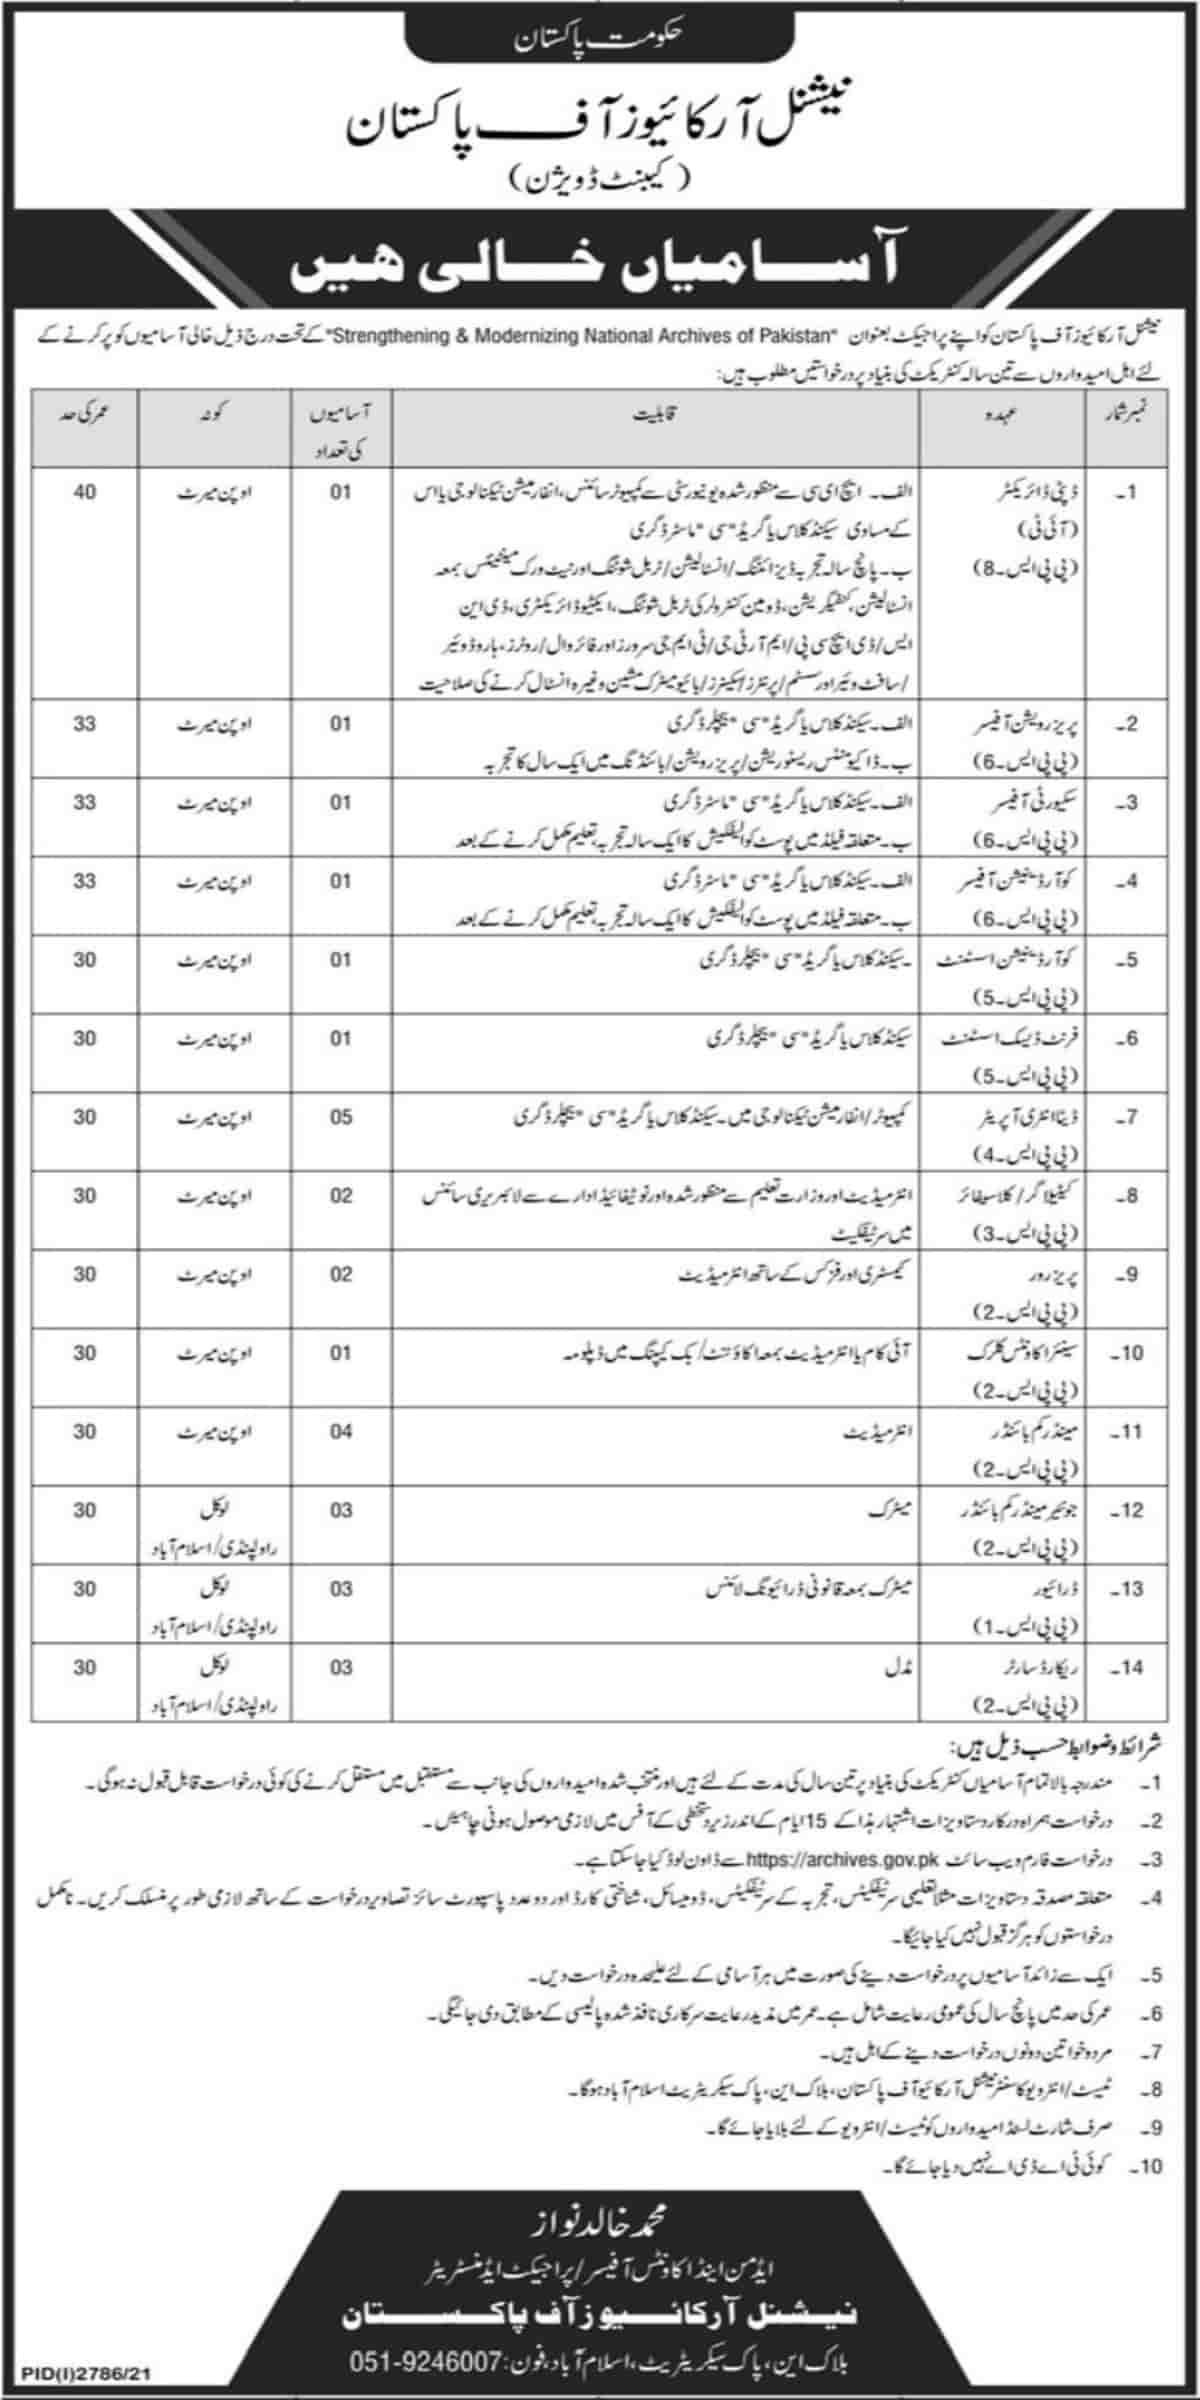 National Archives of Pakistan Cabinet Division Jobs 2021 Latest